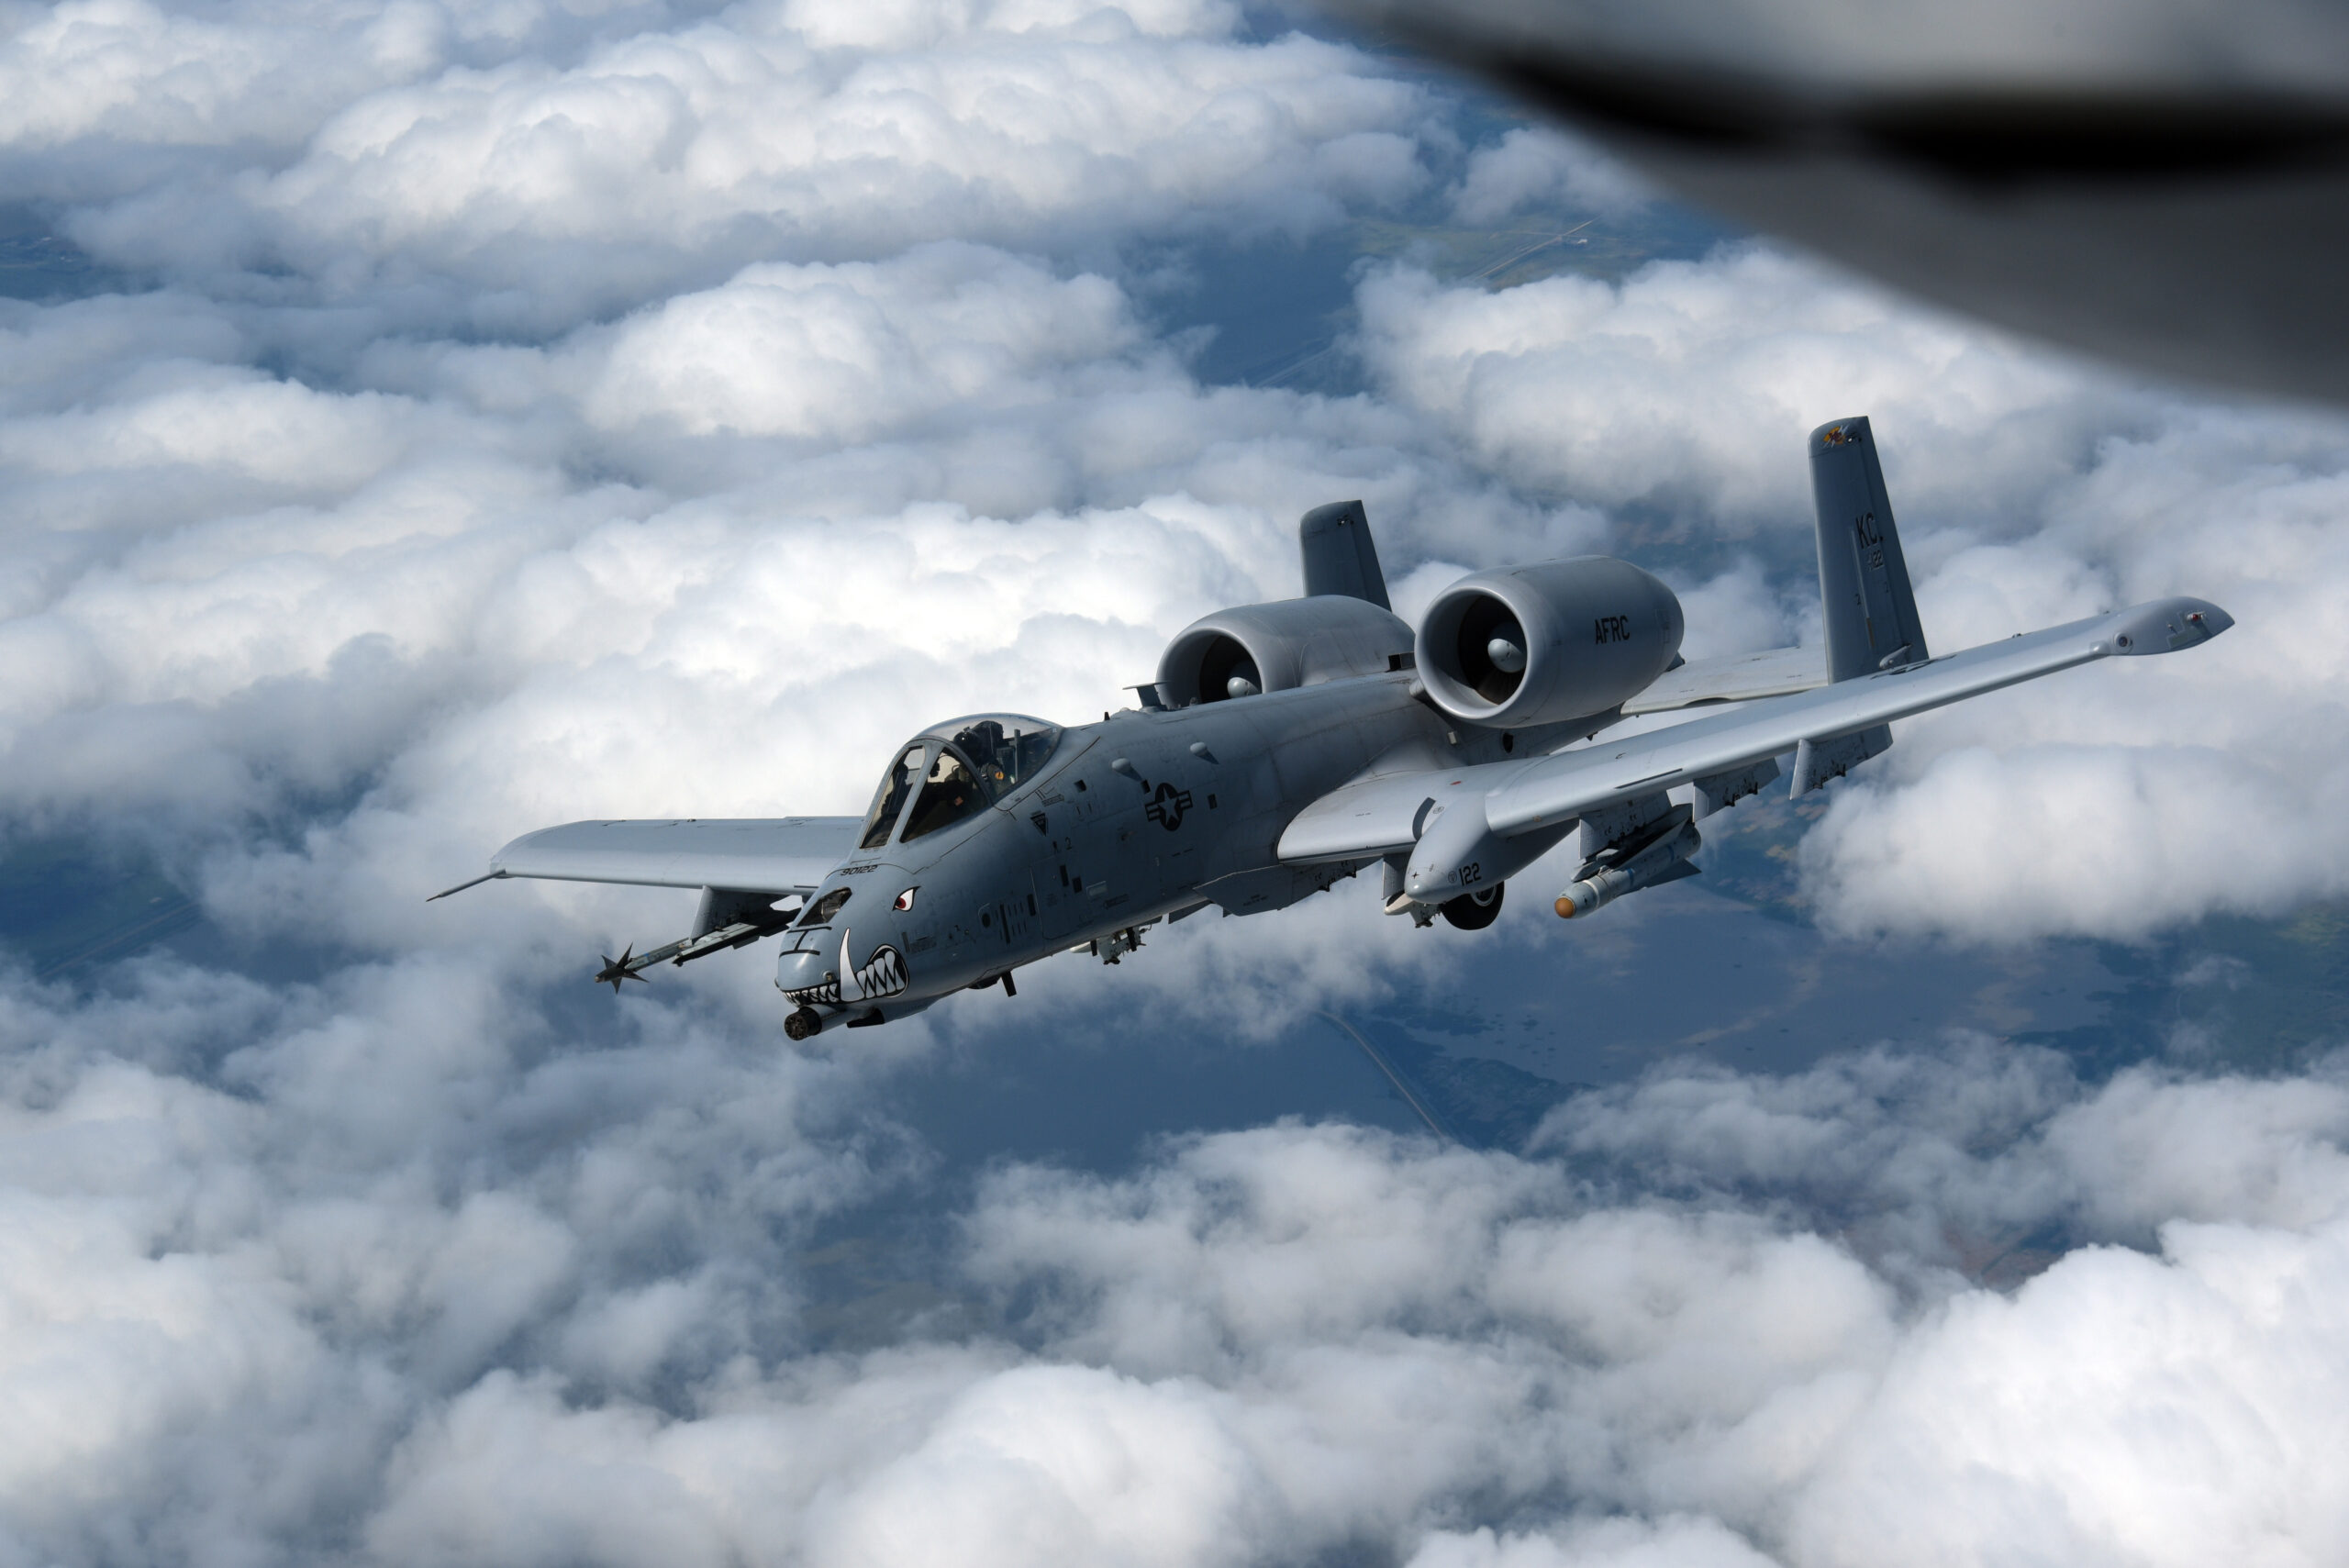 A U.S. Air Force A-10 Thunderbolt II from the 442nd Fighter Wing, U.S. Air Force Reserve, Whiteman Air Force Base, departs after receiving fuel in the skies near the border of Iowa and Missouri on July 7, 2020.

U.S. Air National Guard photo: Senior Master Sgt. Vincent De Groot